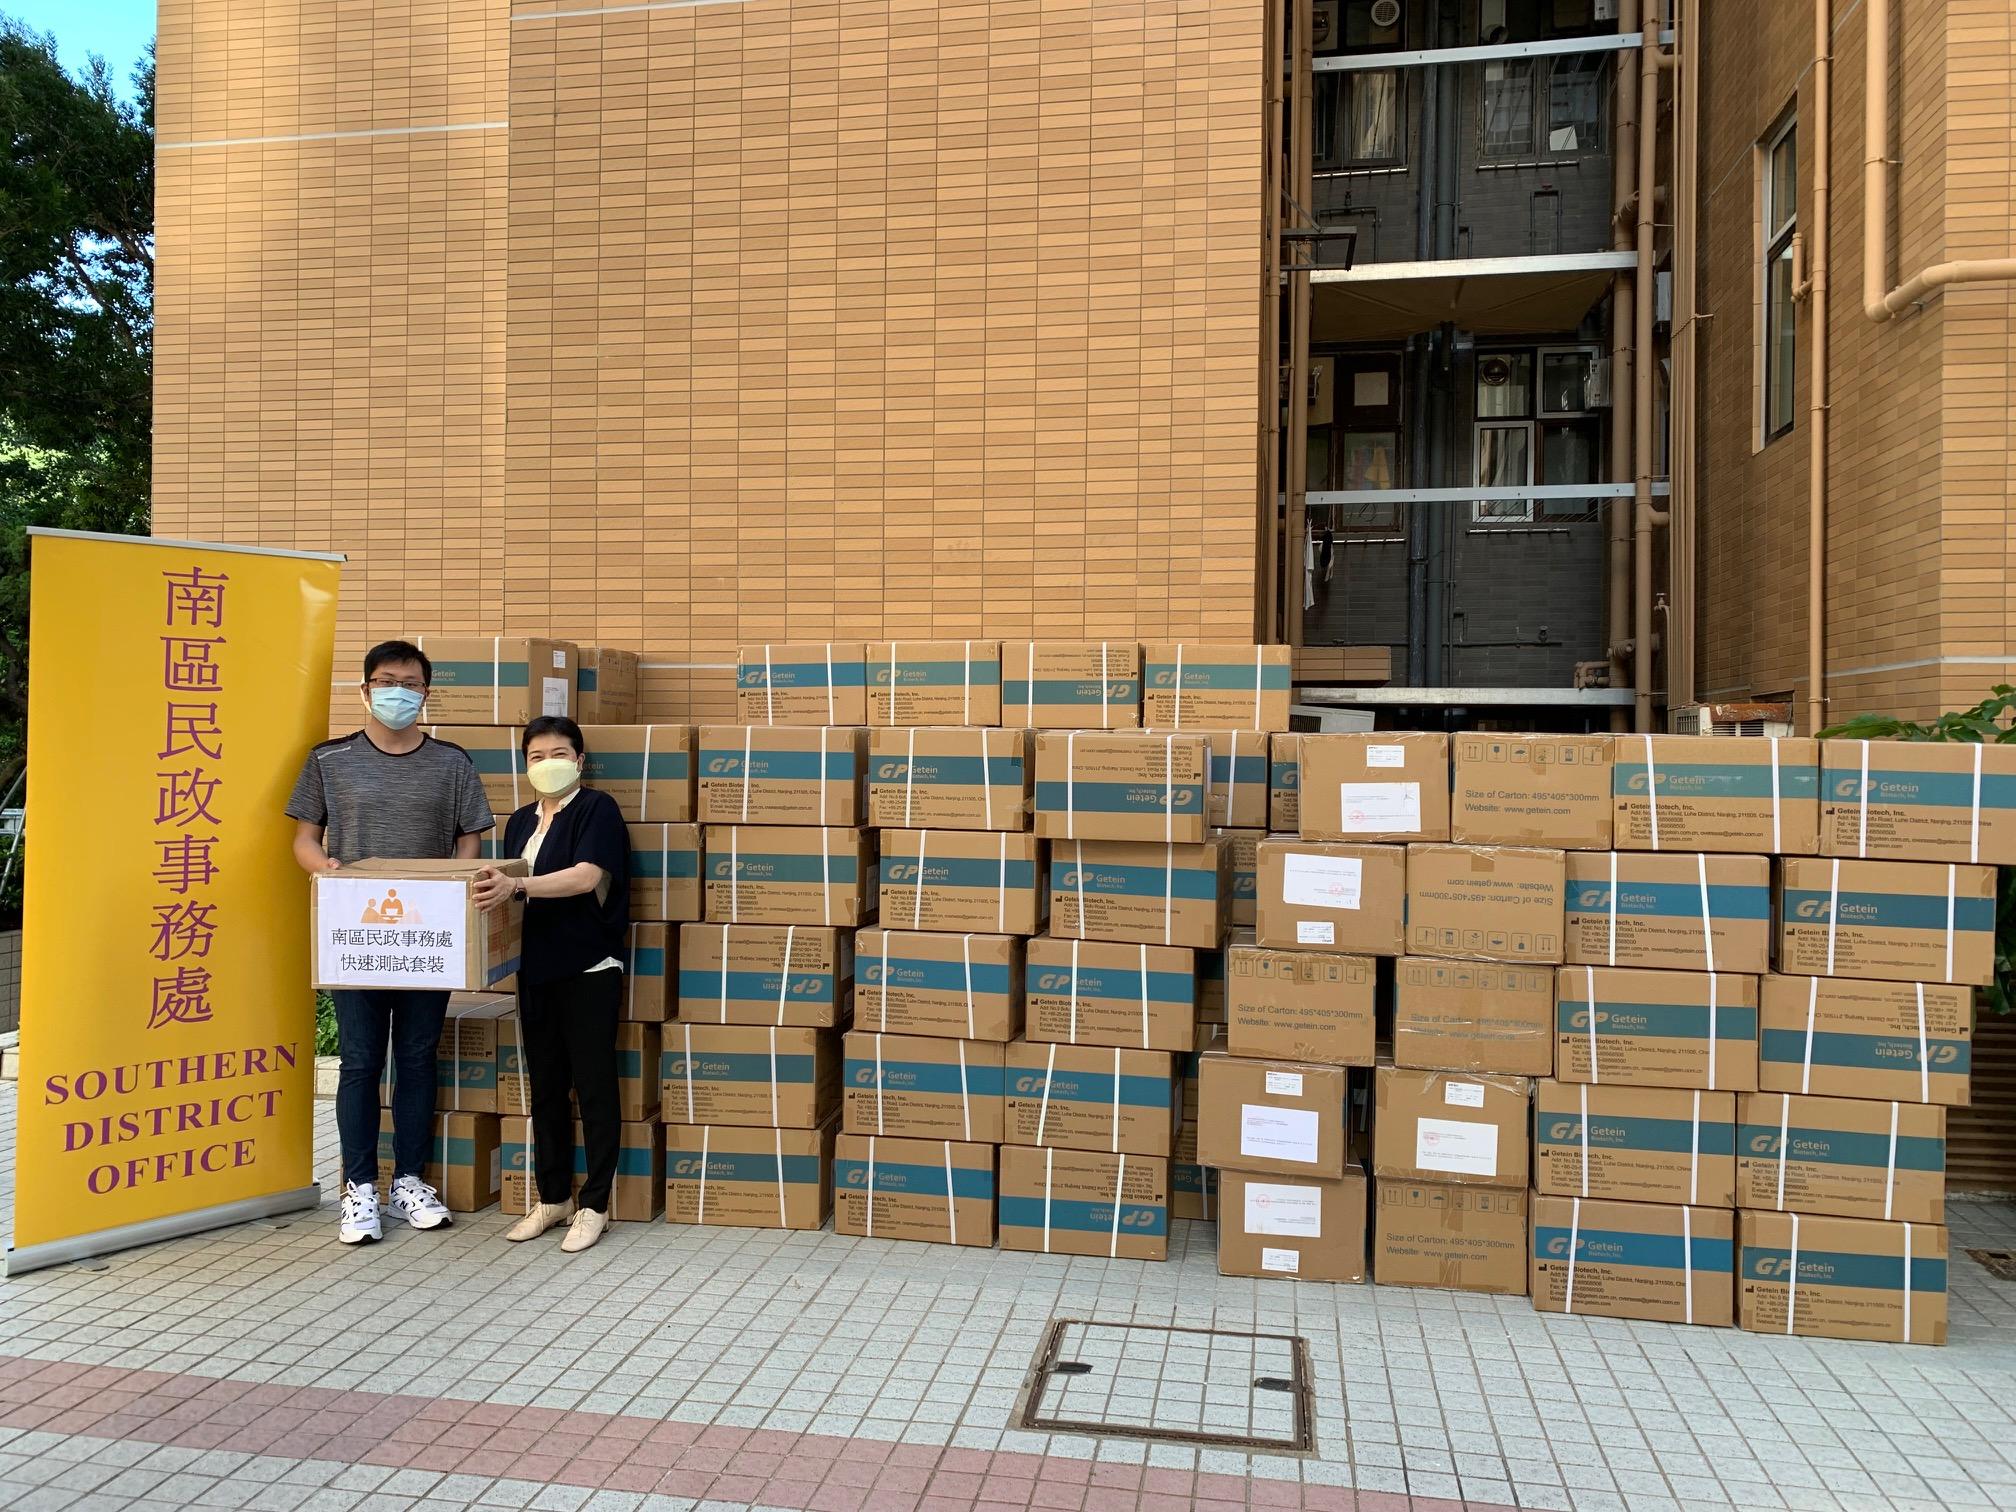 The Southern District Office today (July 8) distributed rapid test kits to households, cleansing workers and property management staff living and working in Chi Fu Fa Yuen for voluntary testing through the property management company.